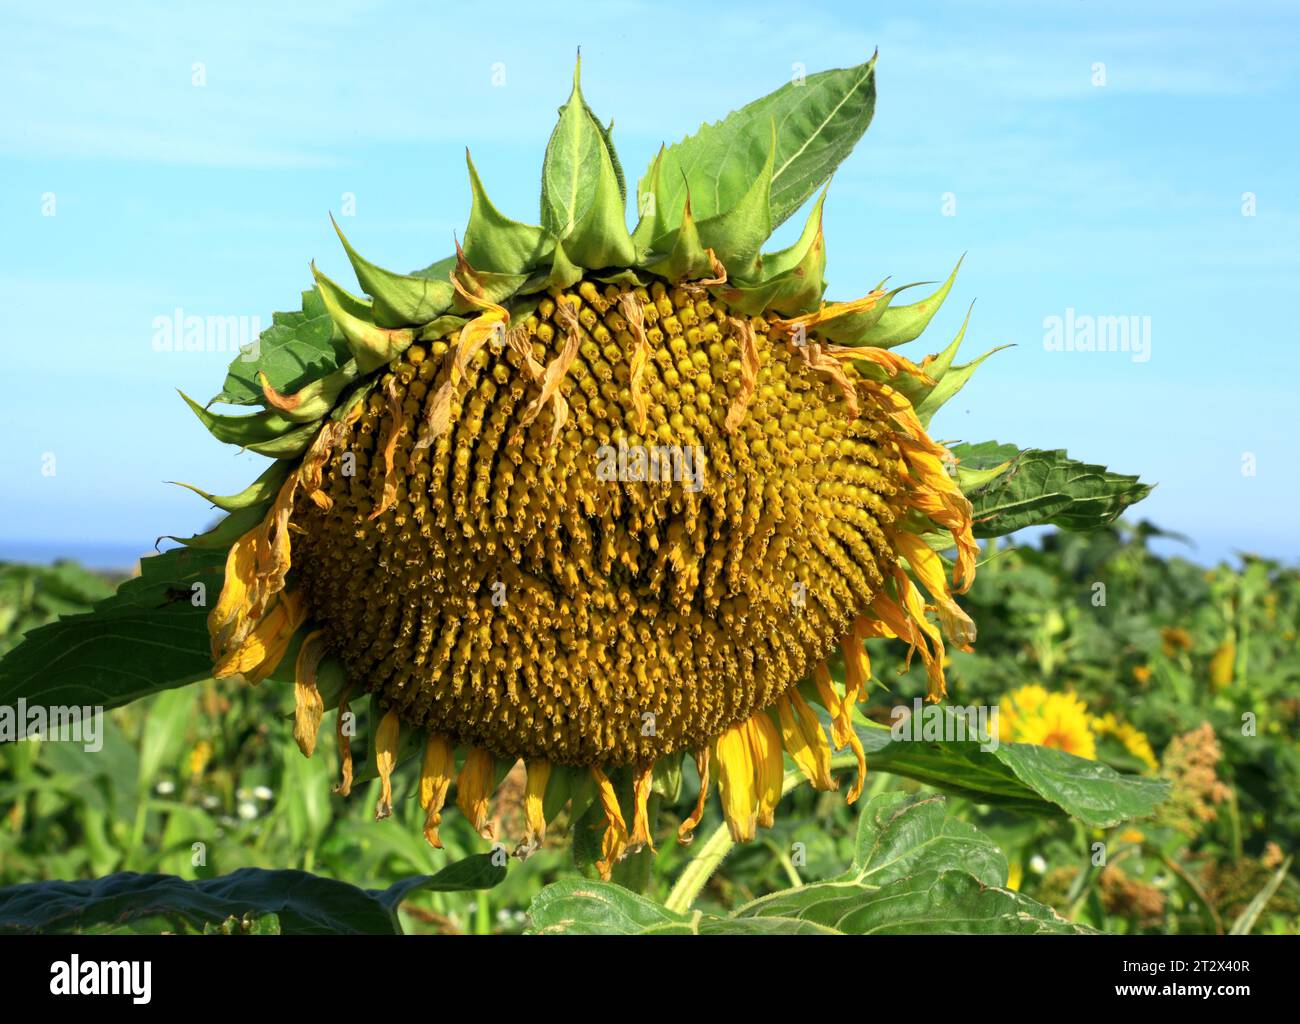 Sunflower, seed head, sunflowers, oil producing plant, flower, seeds Stock Photo